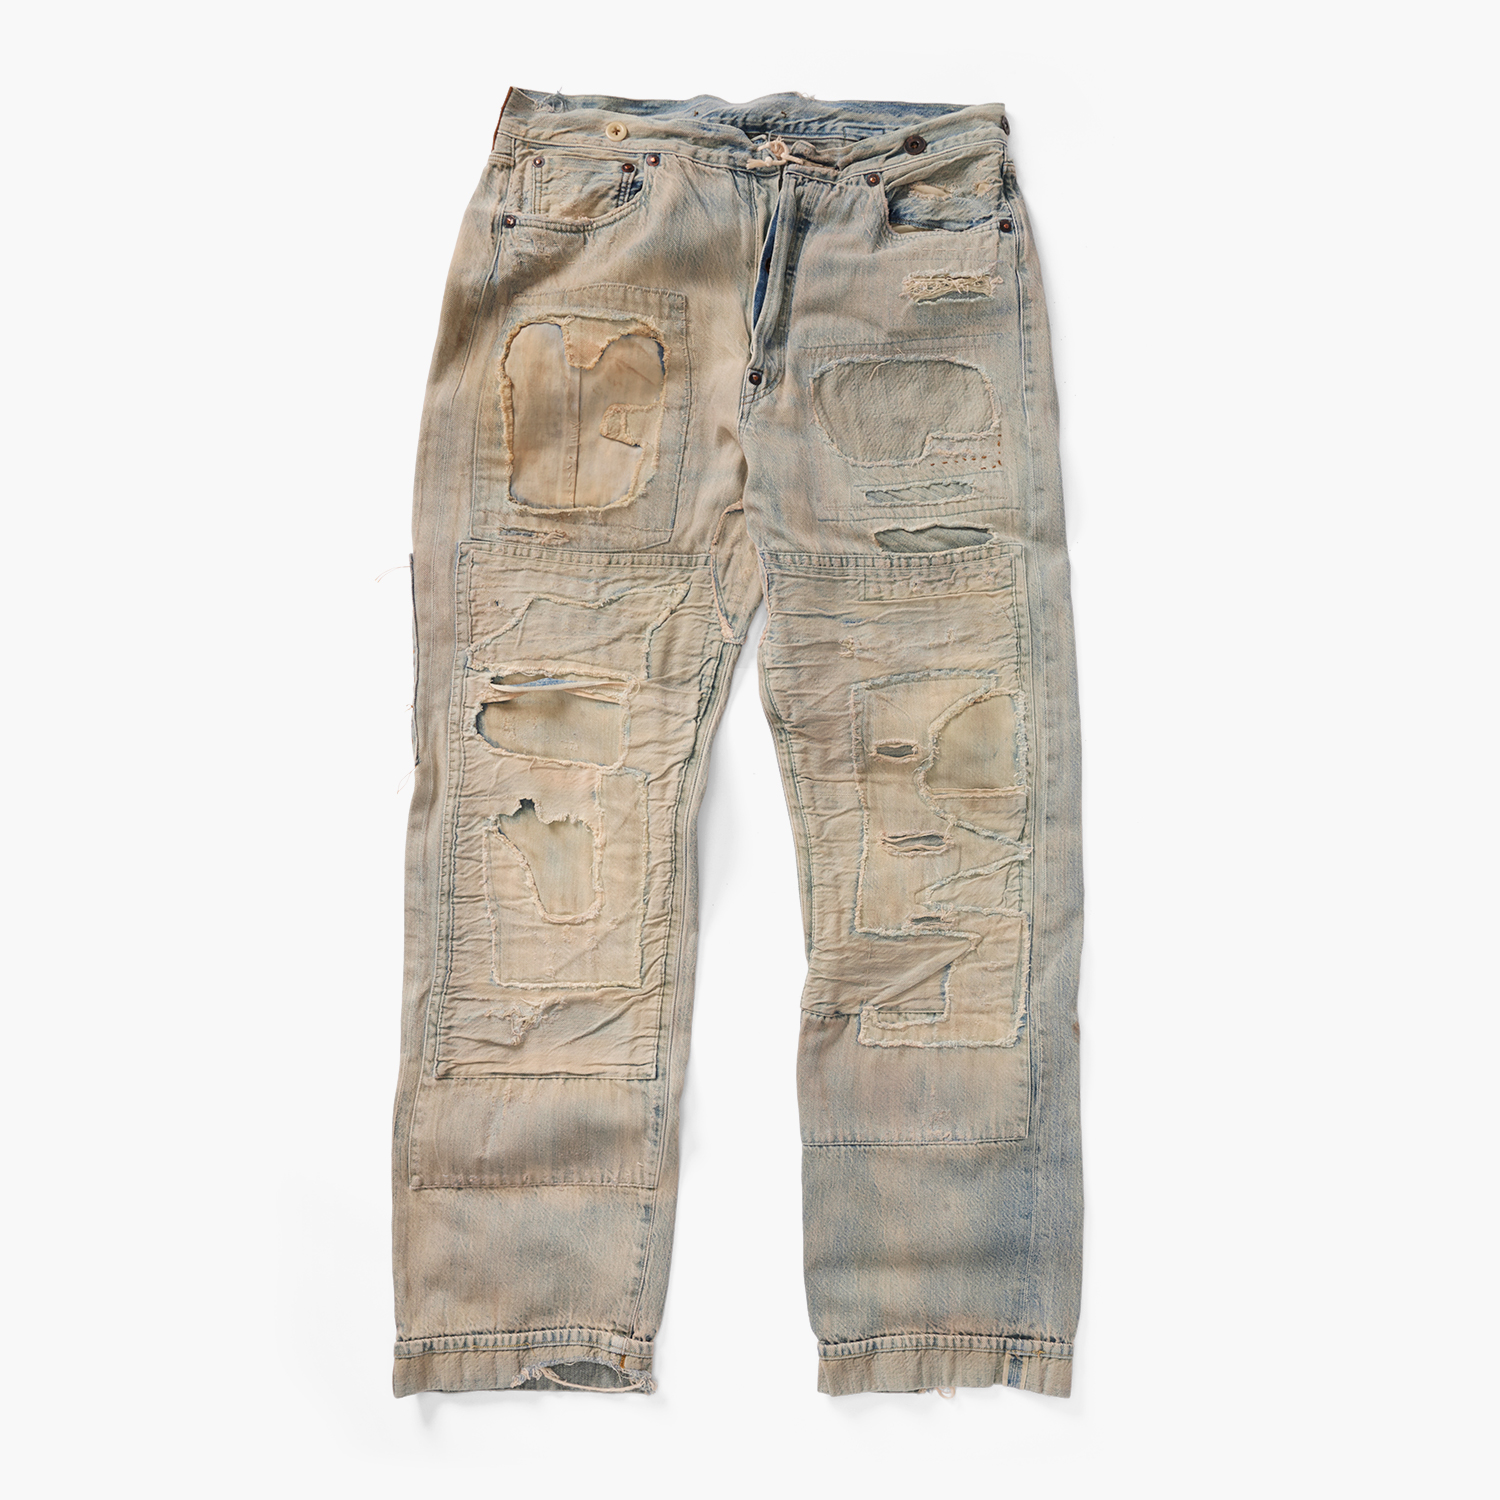 Levi's Homer Campbell 501 denim jeans made by Levi's Vintage Clothing